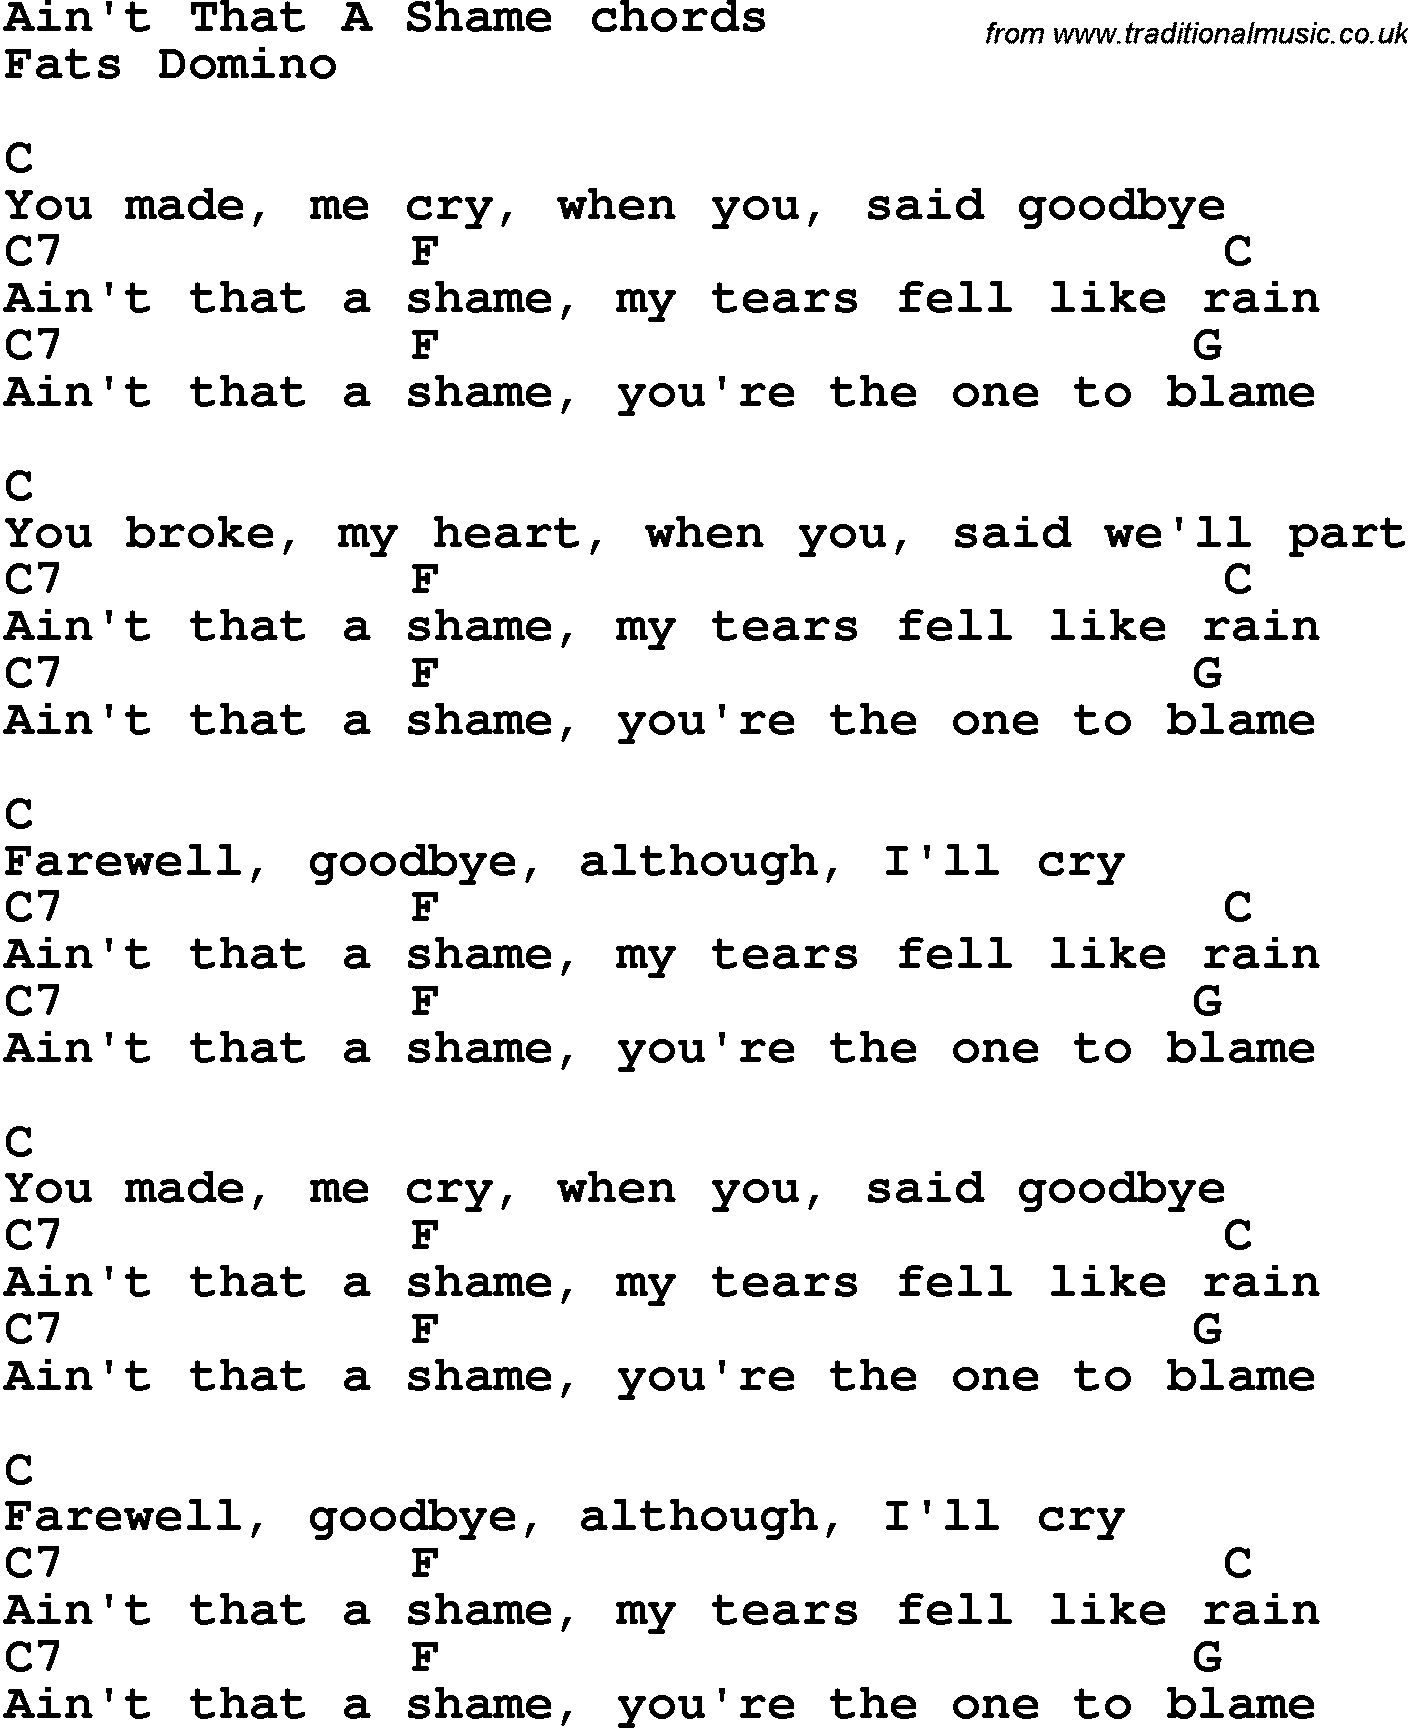 Song Lyrics with guitar chords for Ain't That A Shame